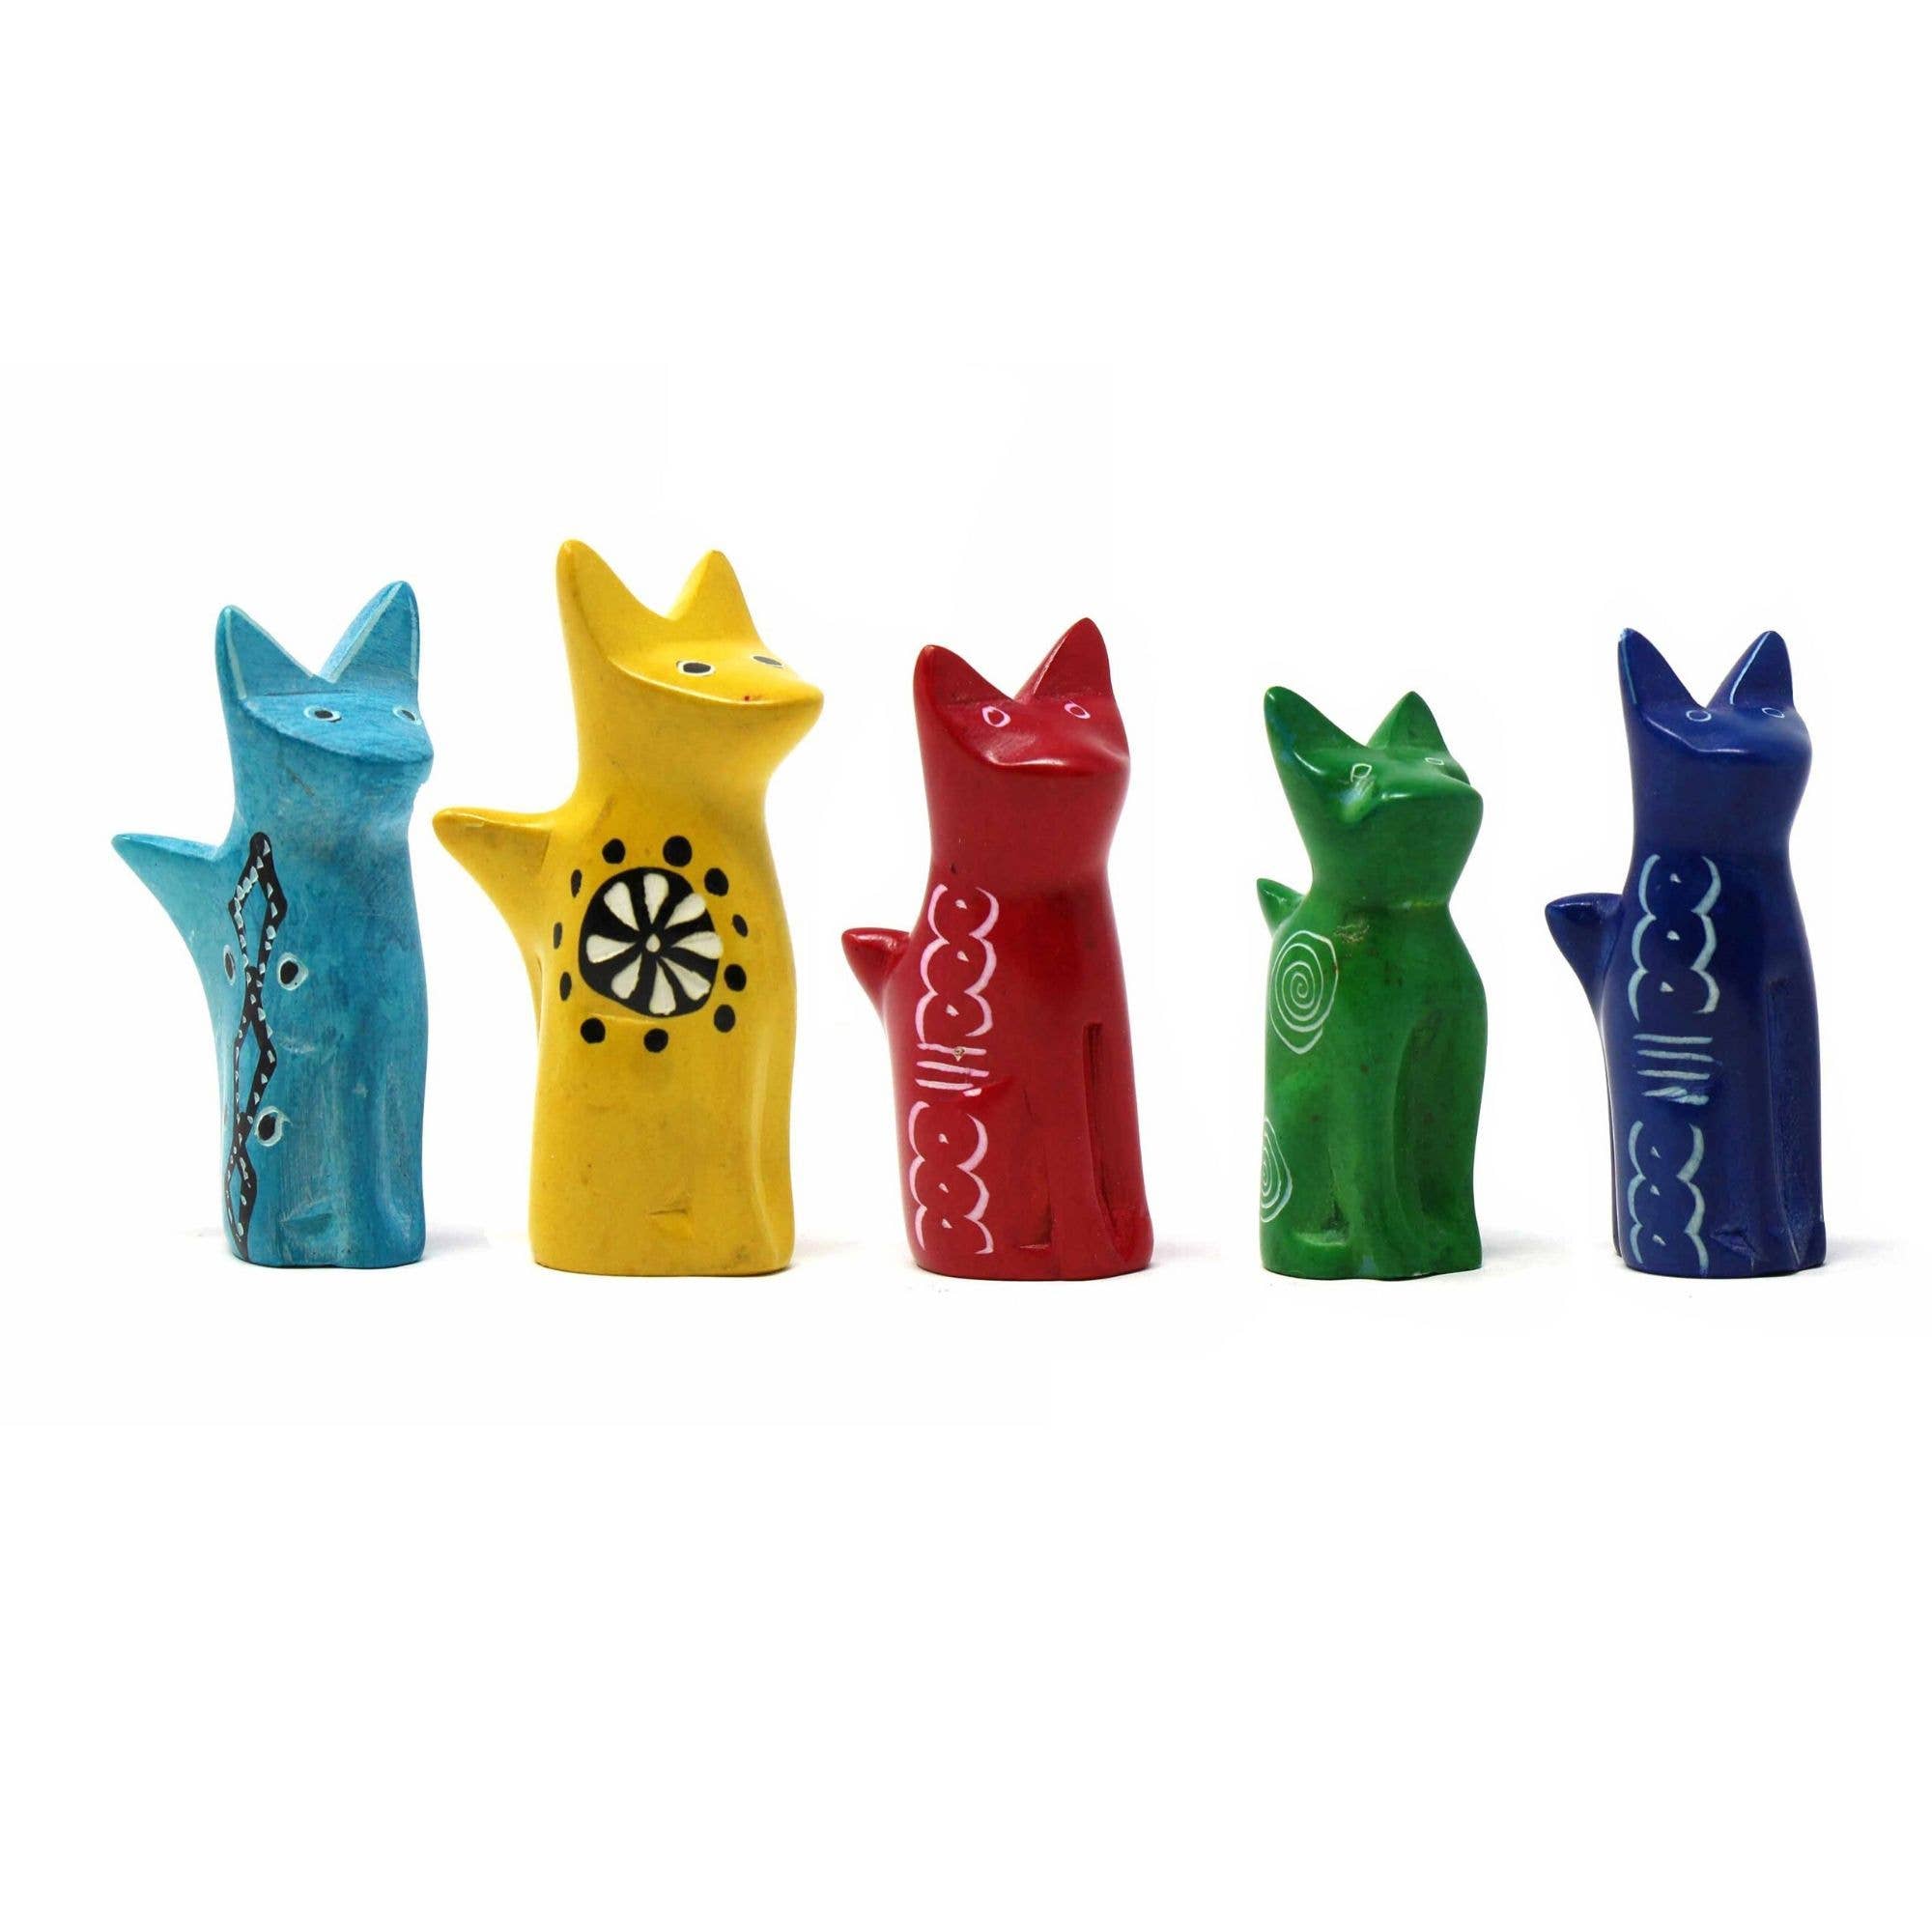 Soapstone Tiny Sitting Cats - Assorted Pack of 5 Colors TEMPLATE - Spiral Circle